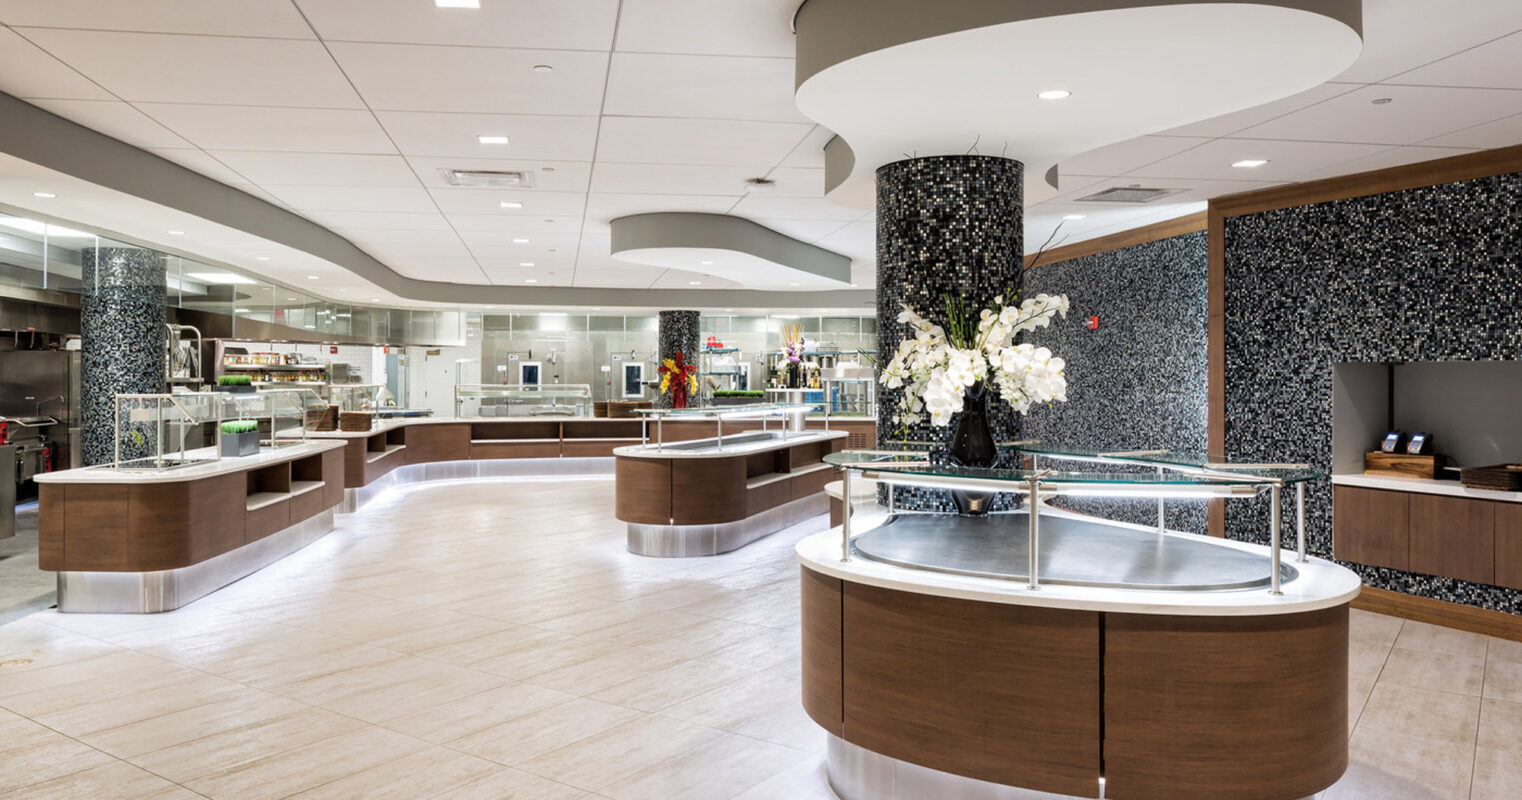 Modern commercial kitchen with curved walnut reception desks, black granite countertops, and cylindrical accents. White orchids add elegance against a black stone-tiled column, complemented by recessed and pendant lighting in the open, neutral-toned space.